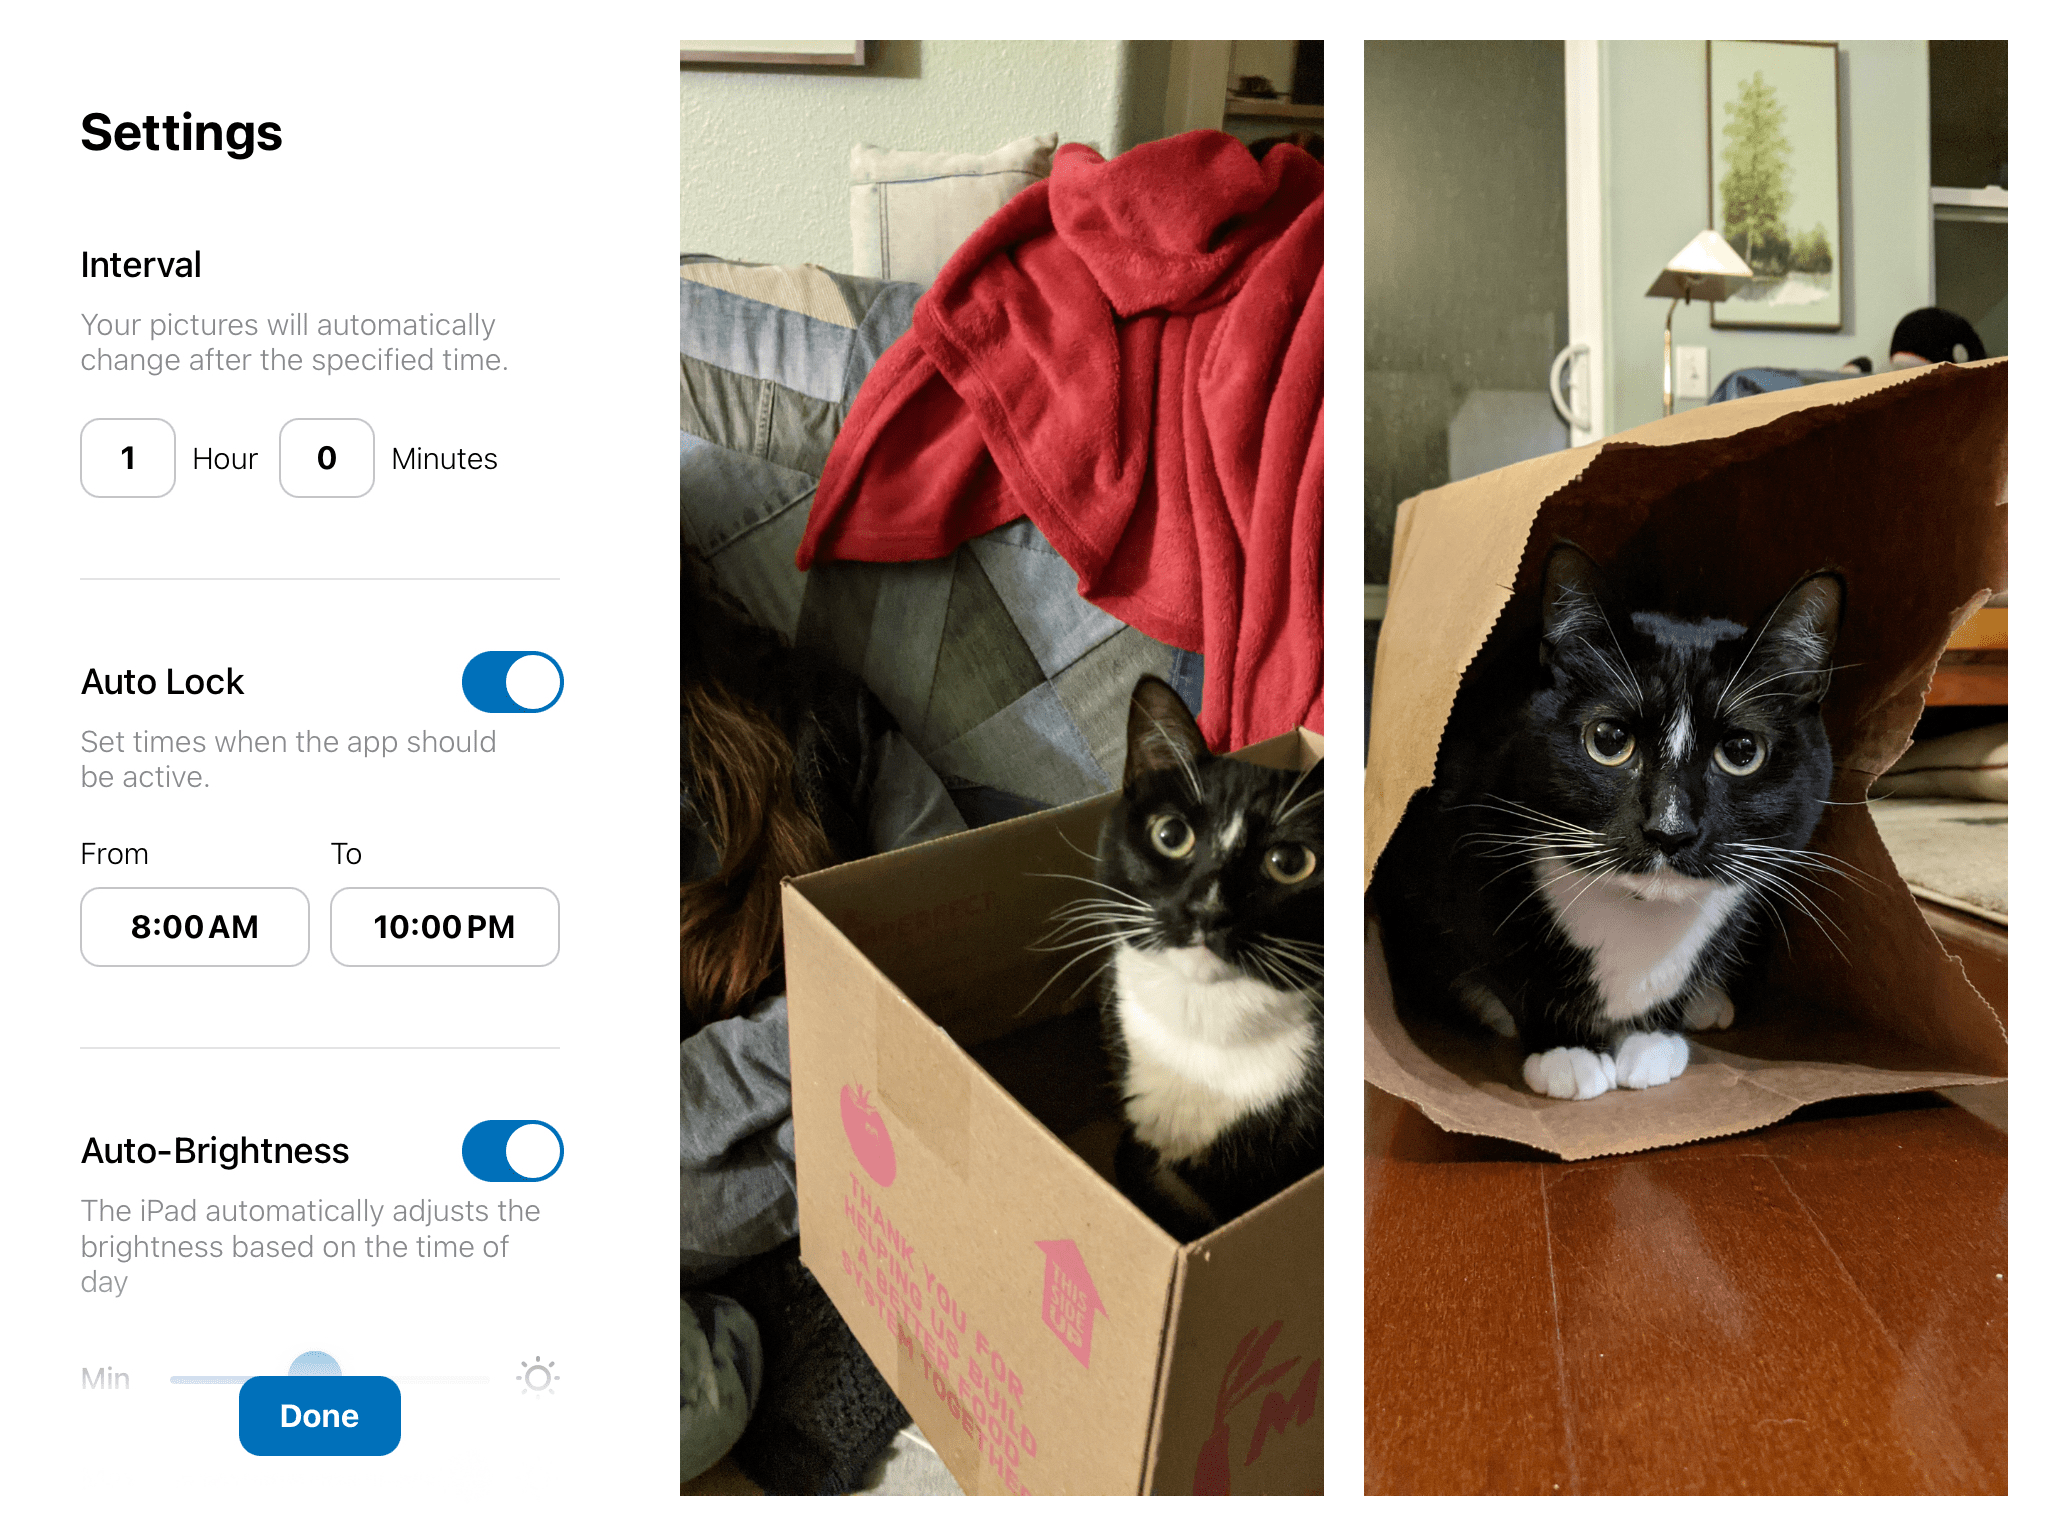 settings within photo app and images of cat